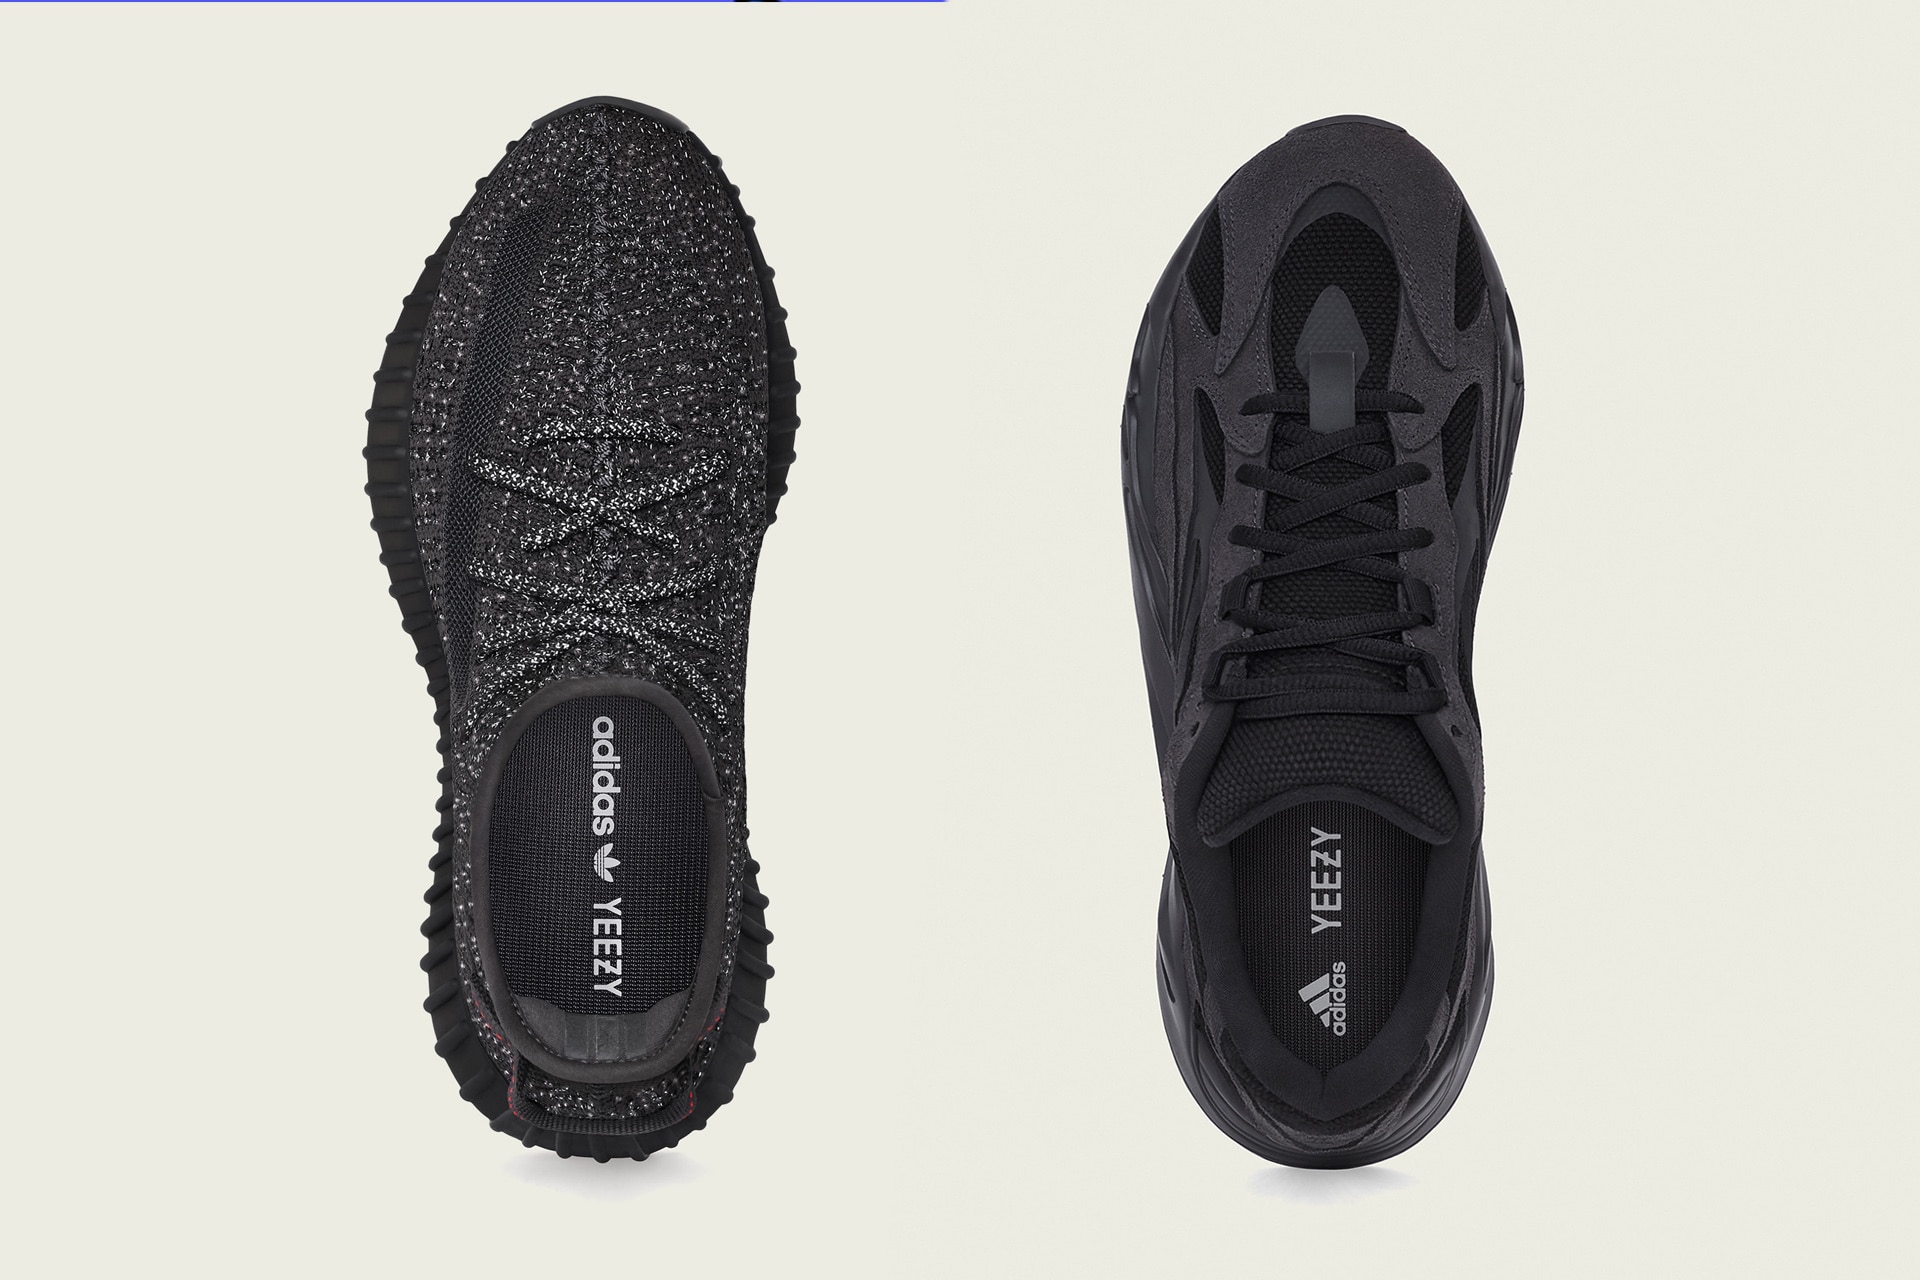 Two Blacked-Out YEEZY Drops 